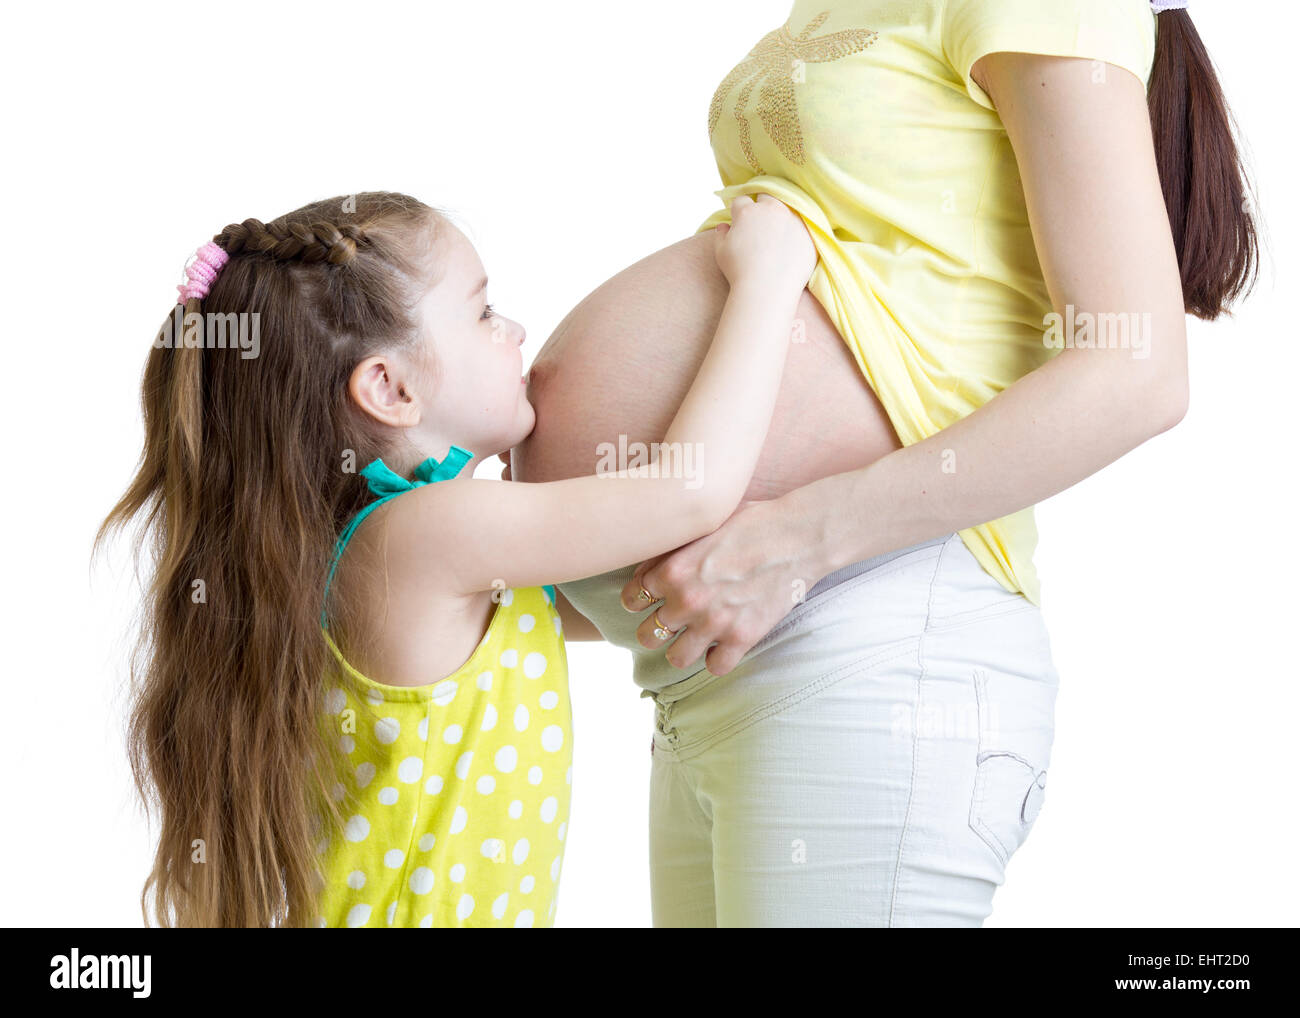 Cute child girl embracing pregnant mother belly Stock Photo